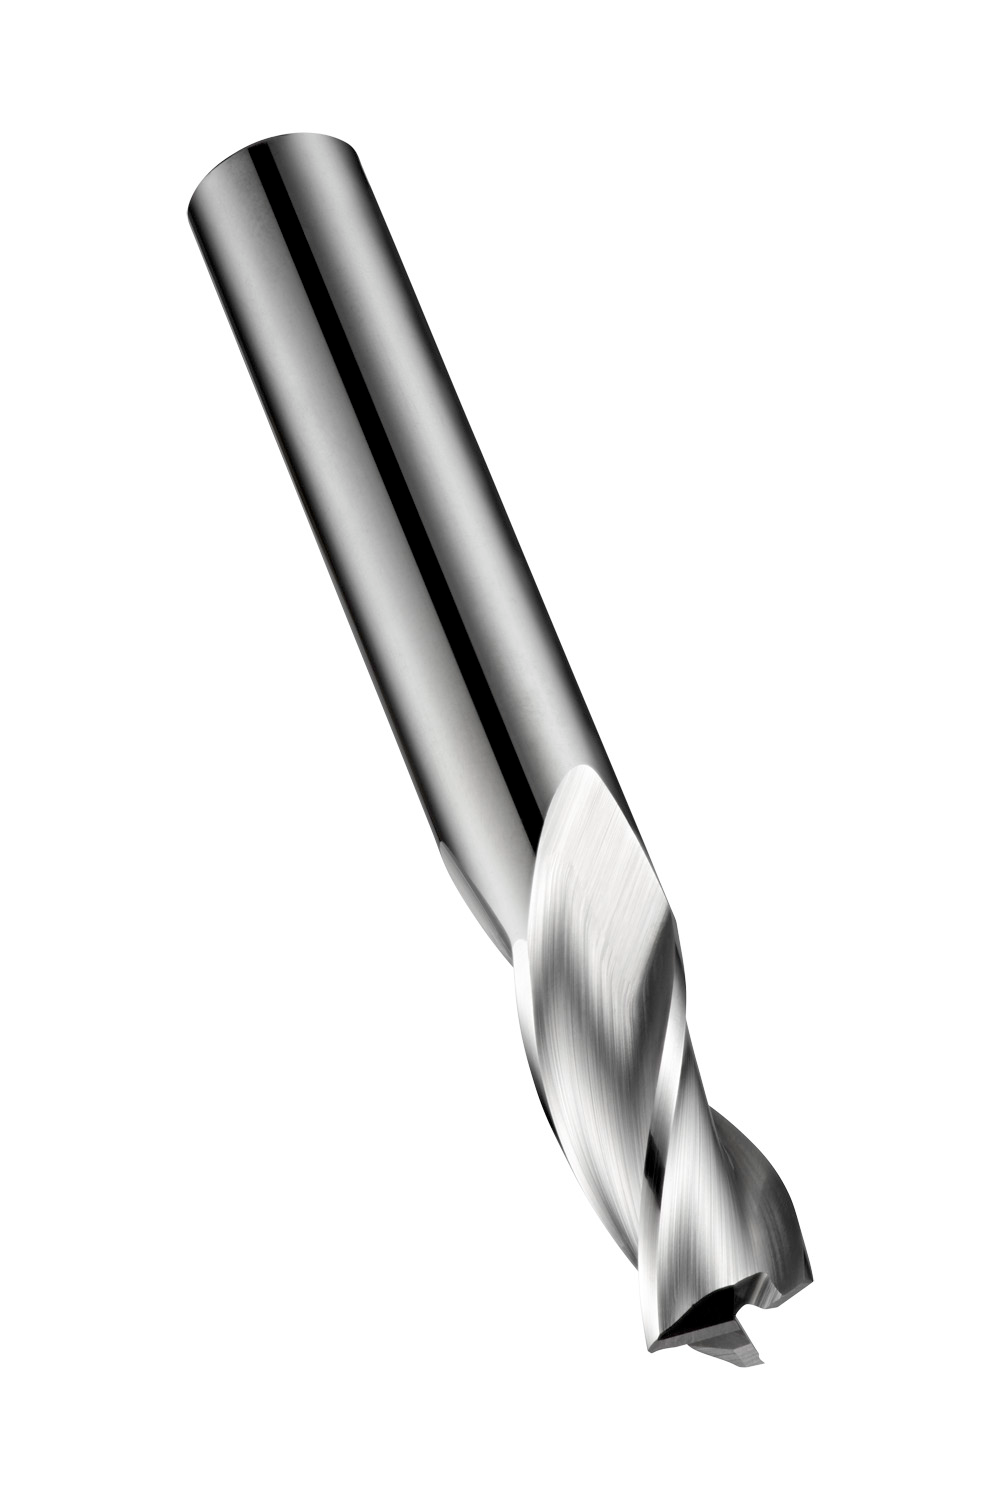 S90310.0 - End Mills